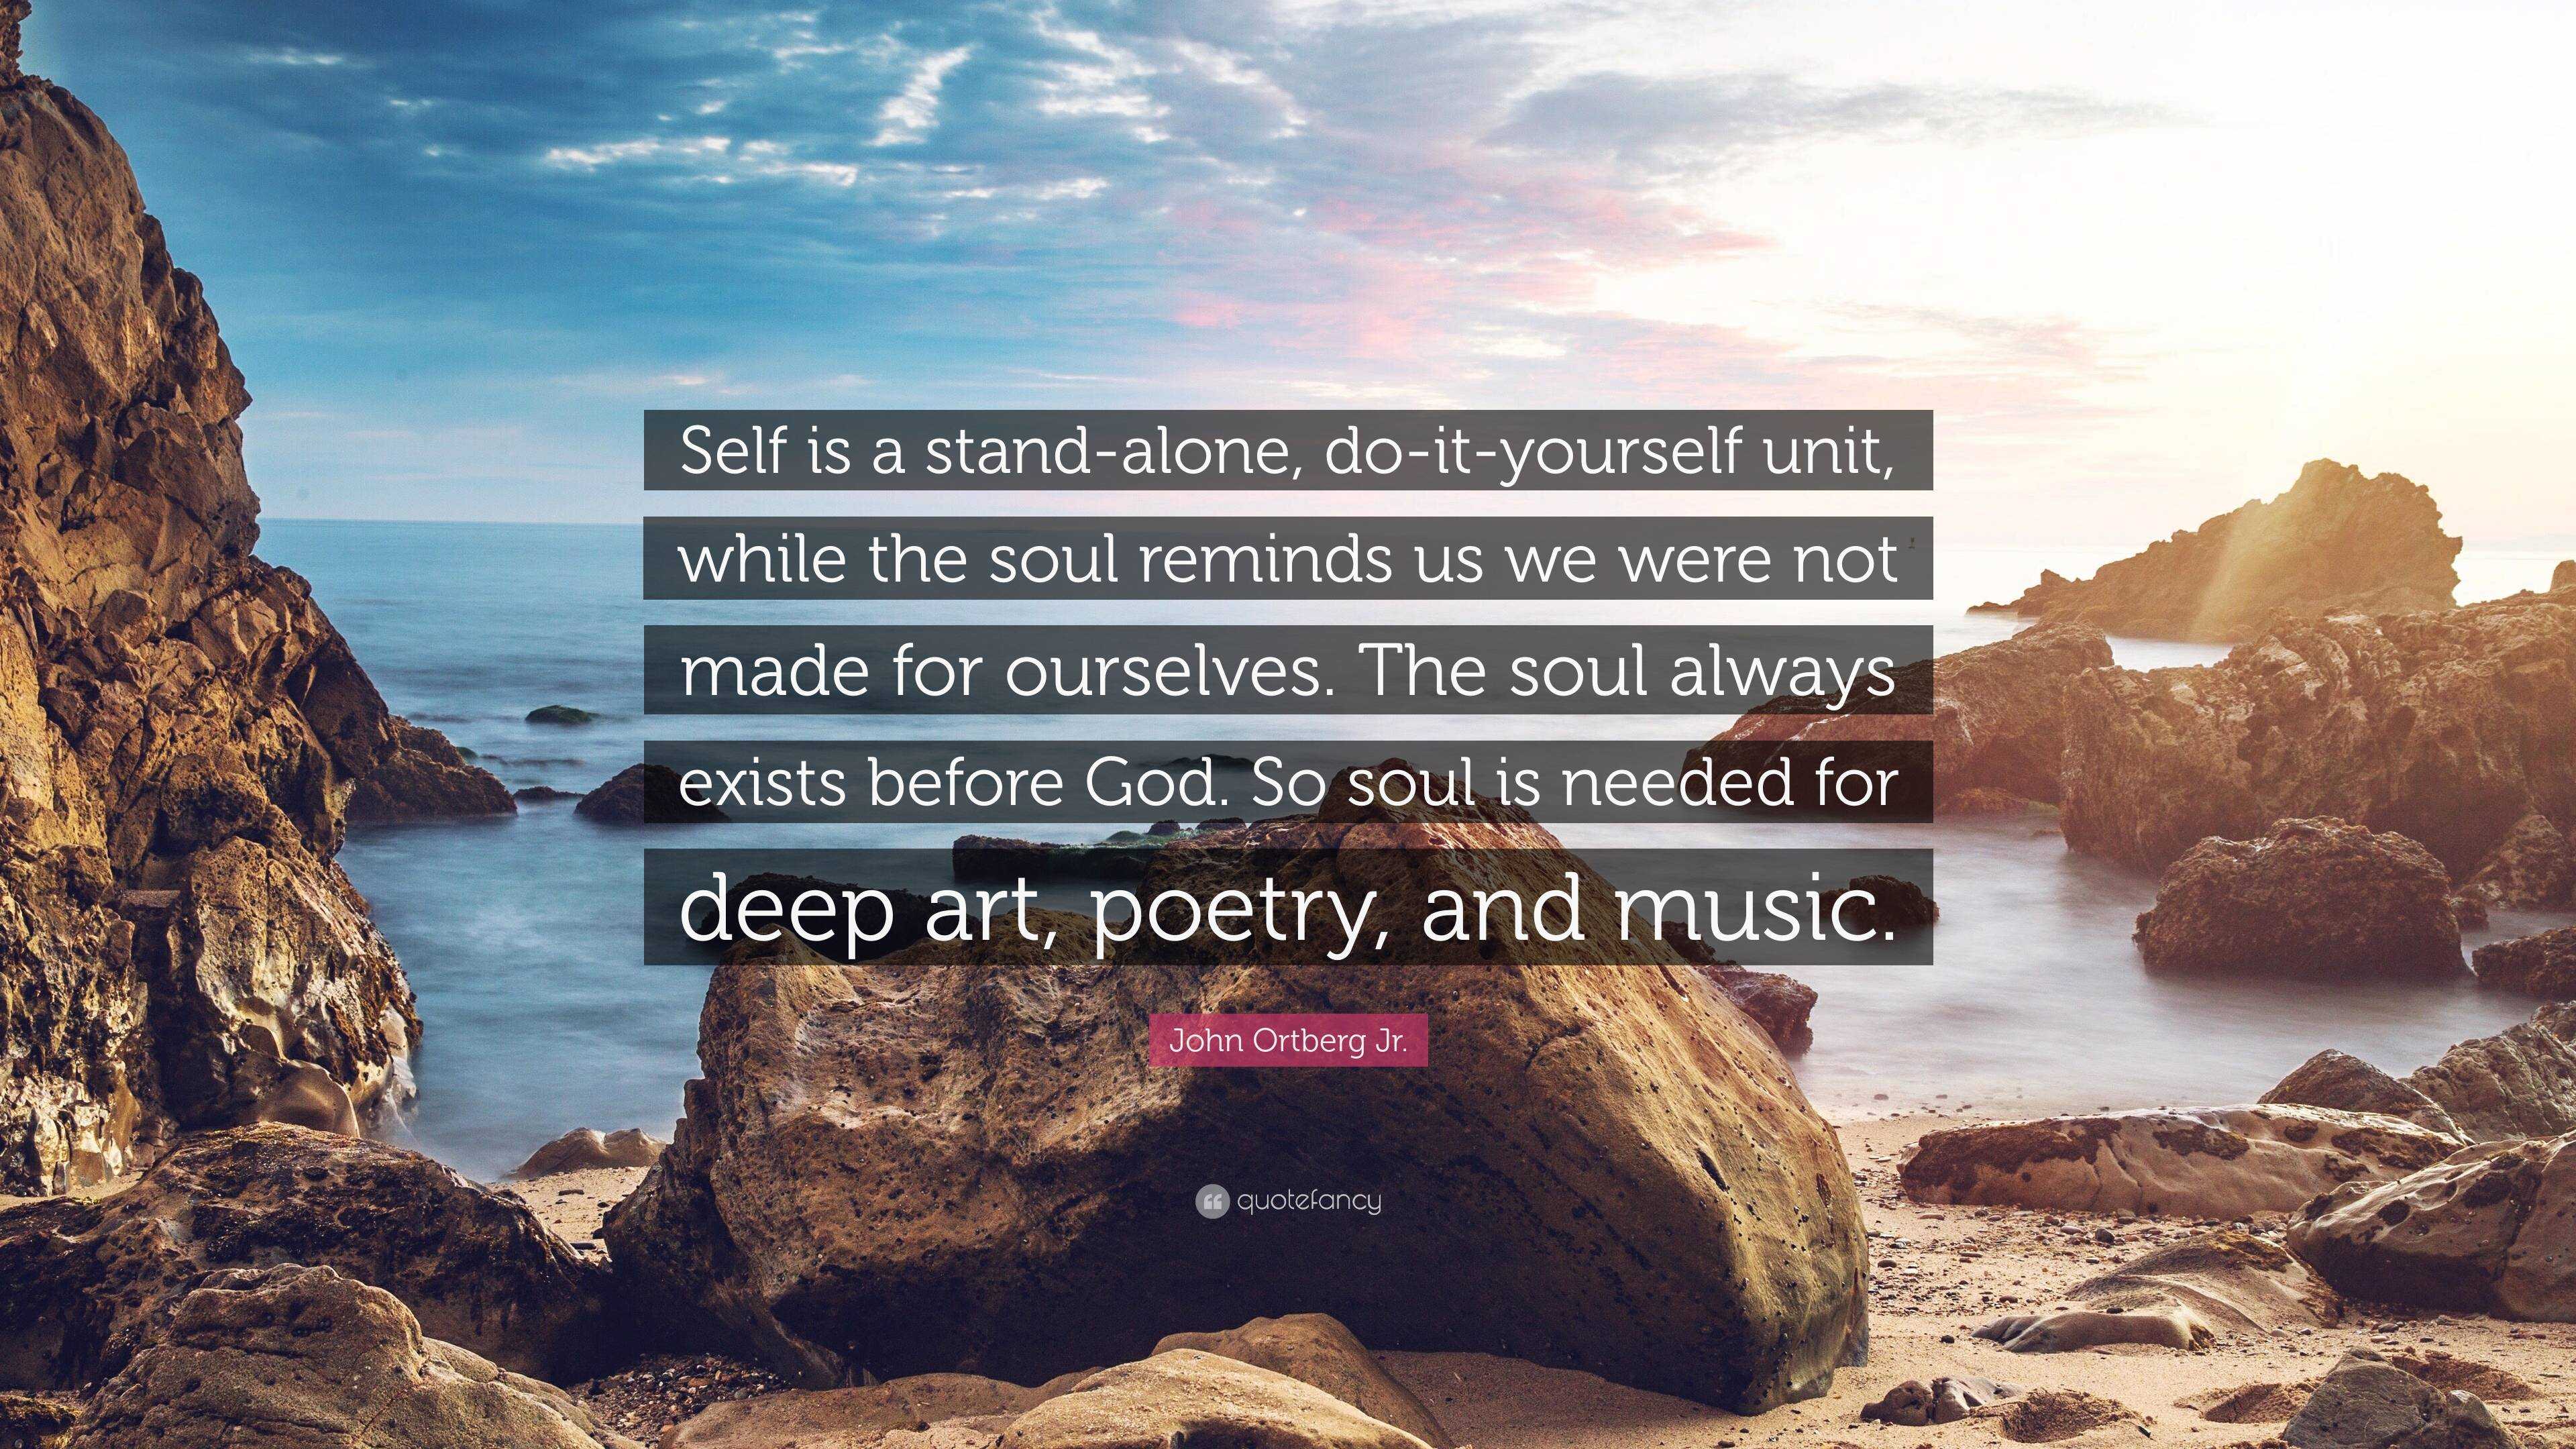 Does Your 'Self' Have a Soul?